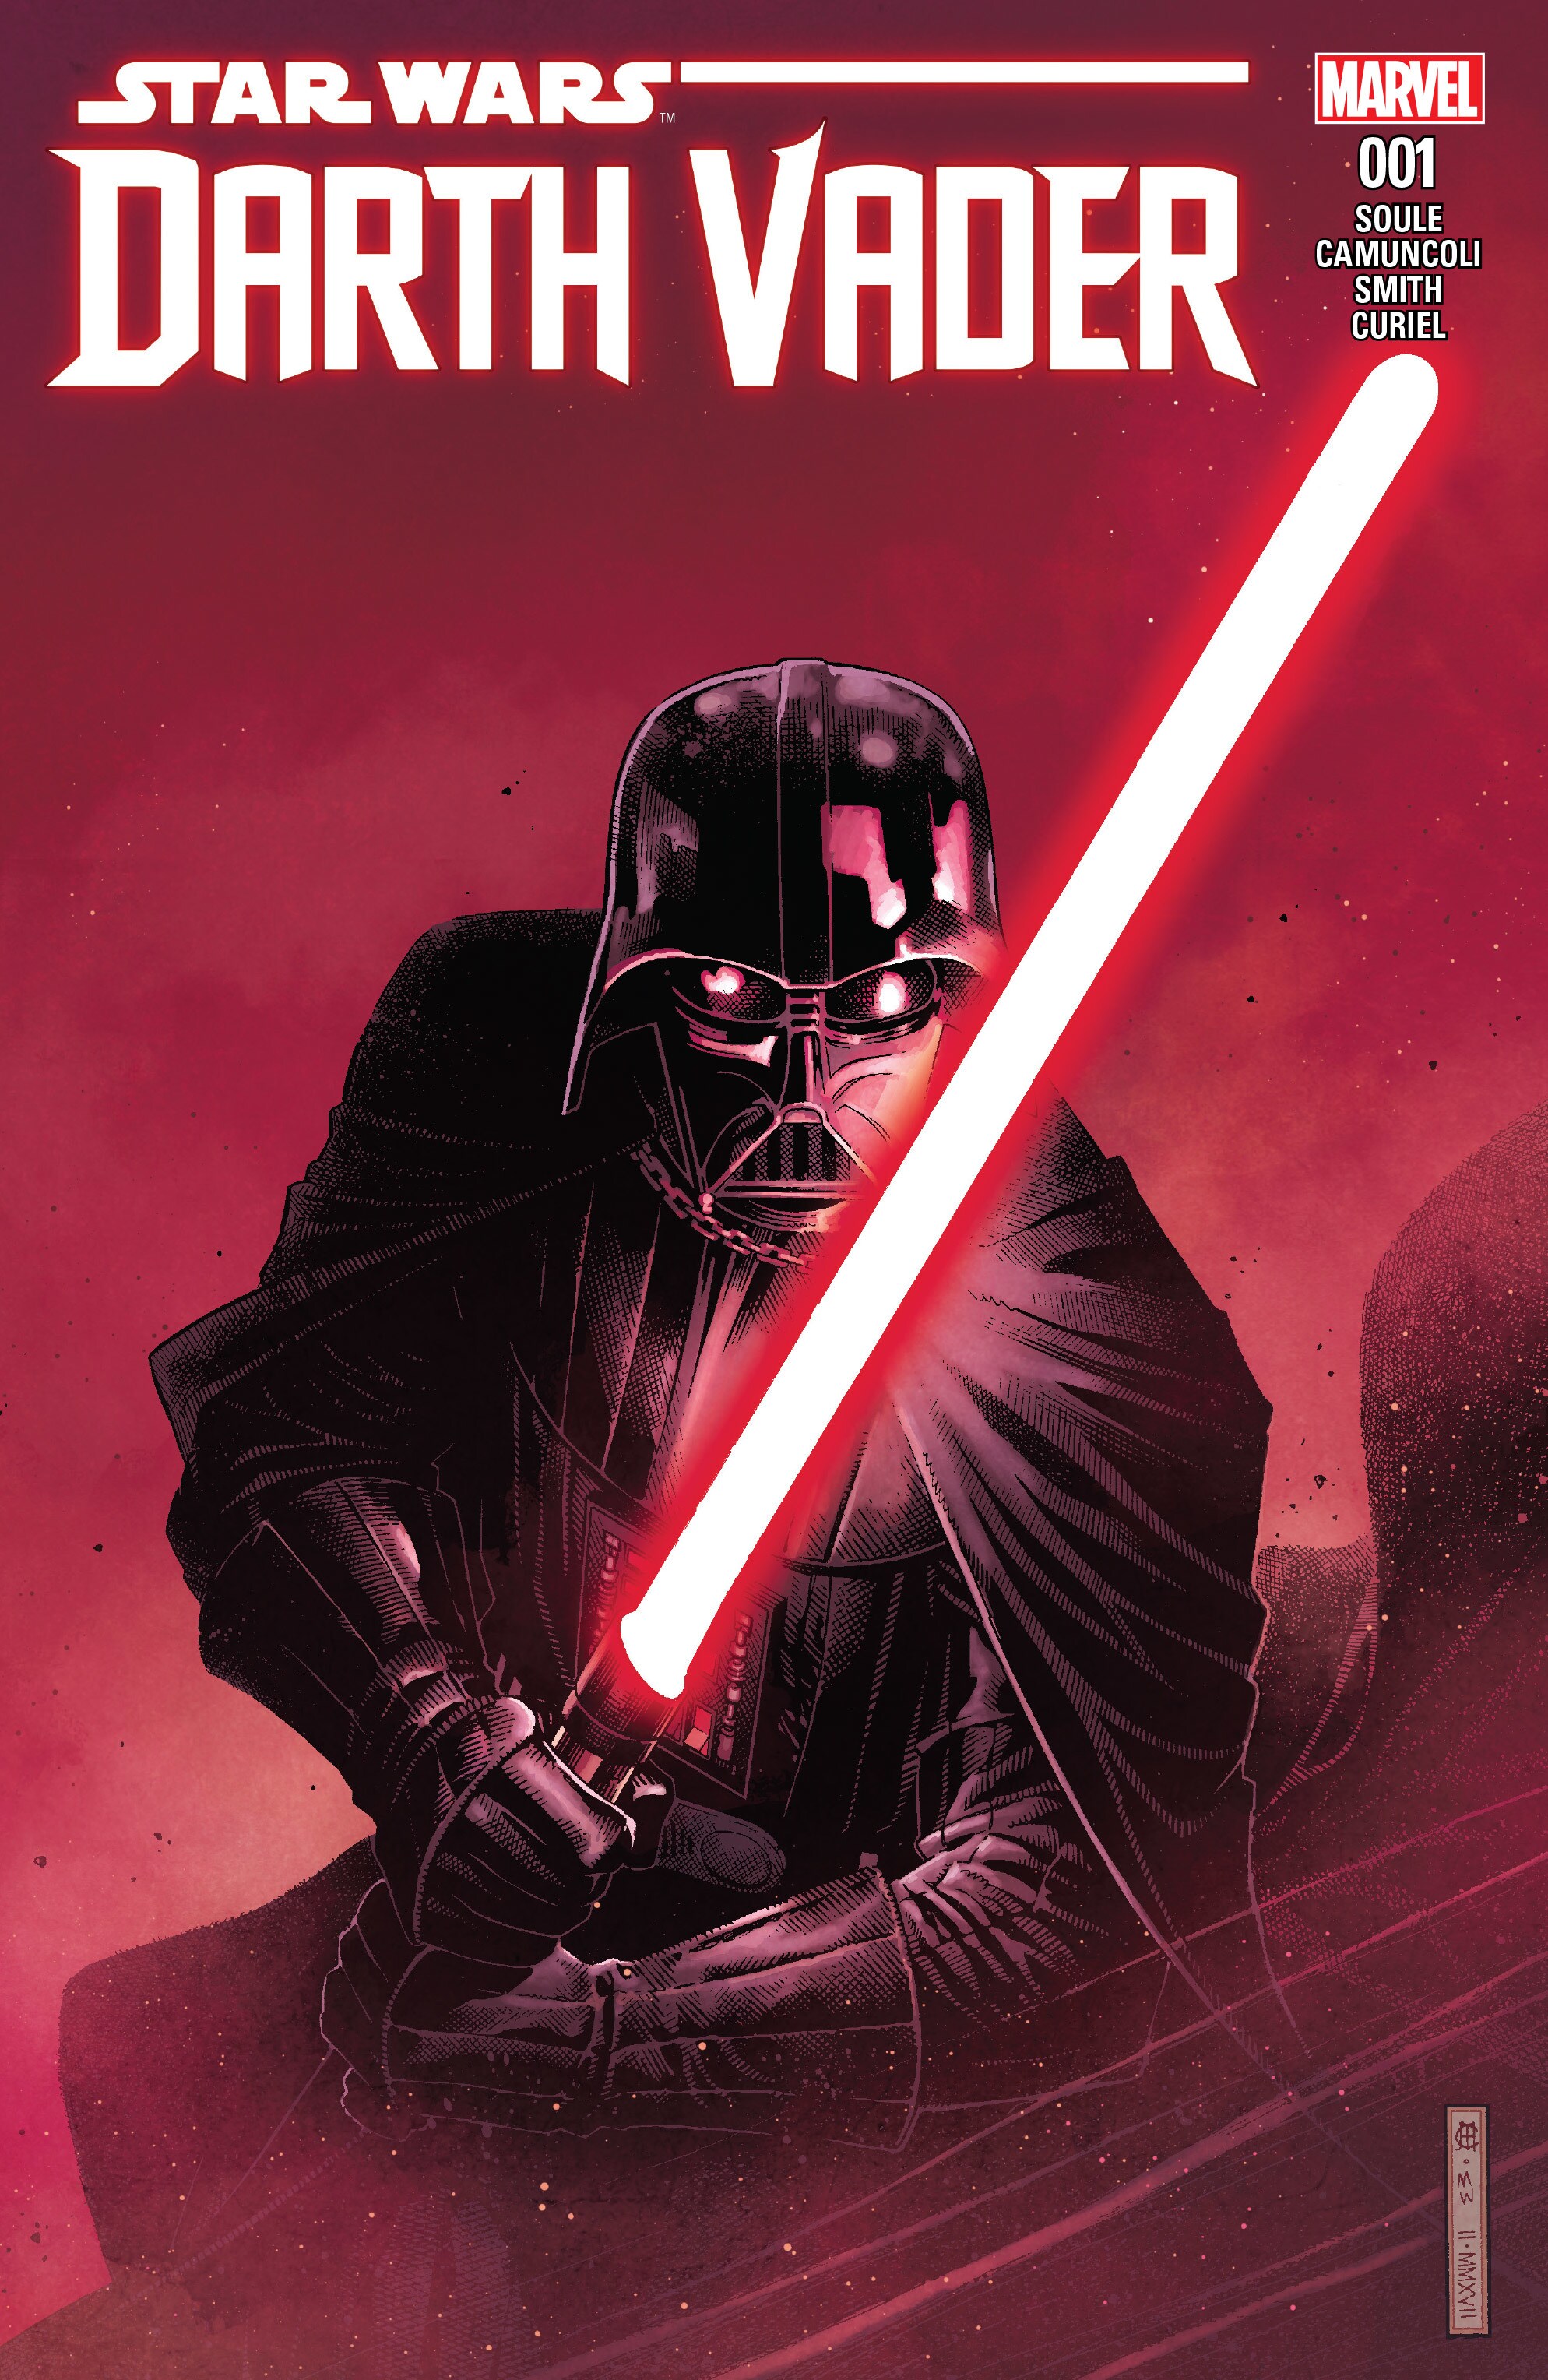 Darth Vader Dark Lord of the Sith cover